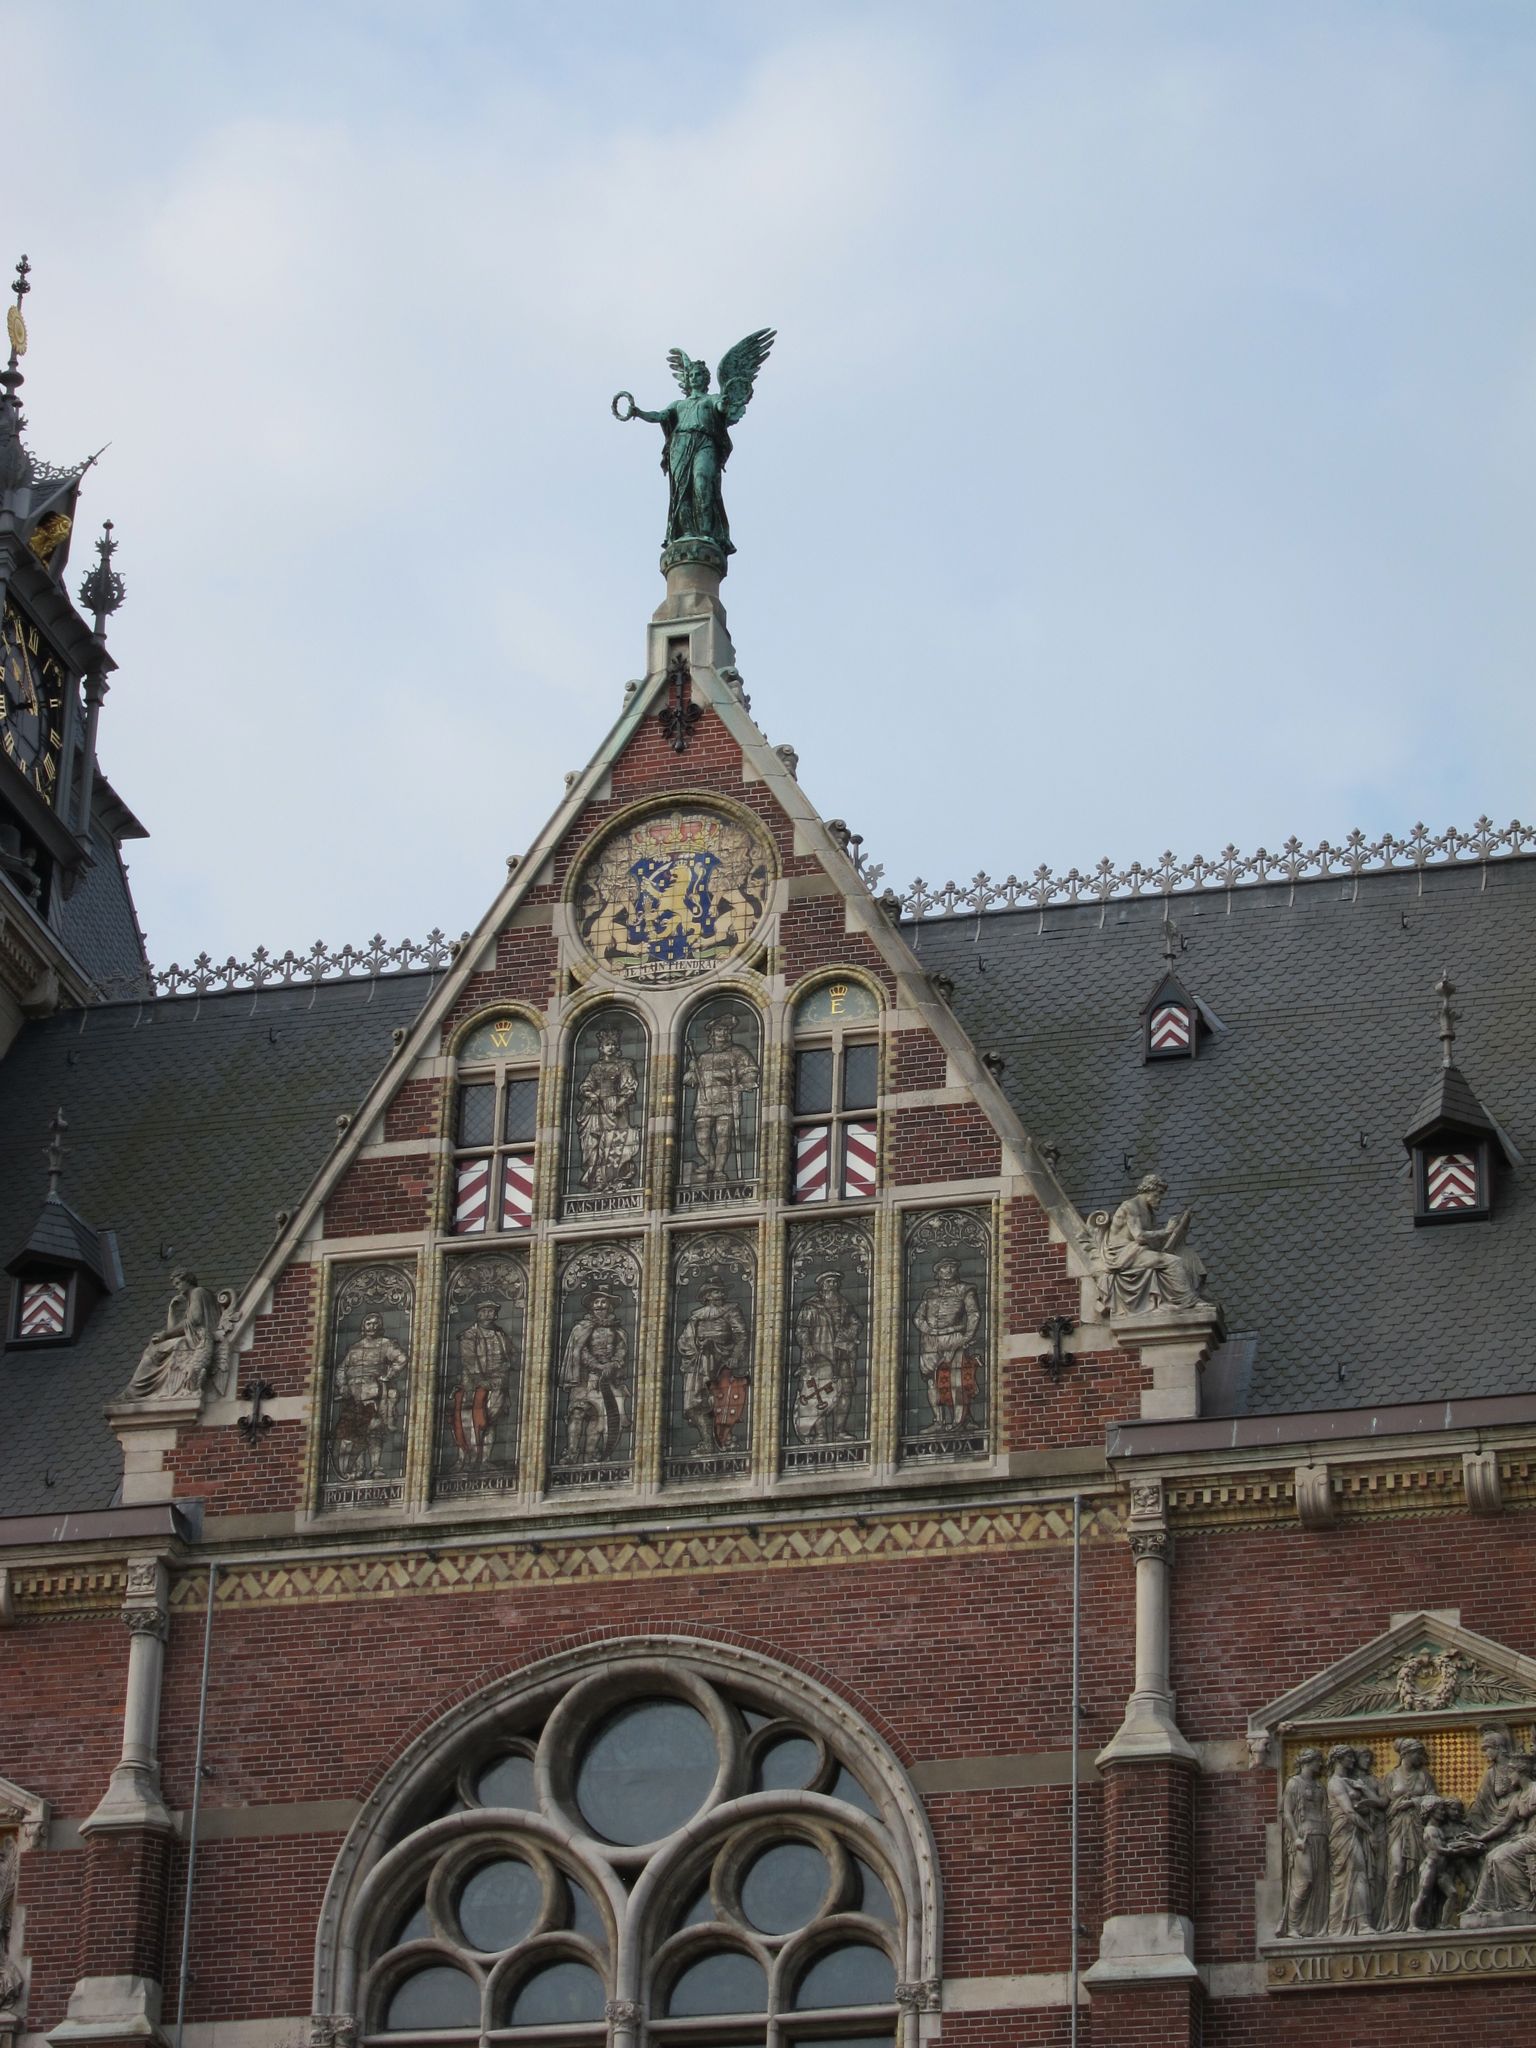 Photo 57 of 90 from the album Highlights Amsterdam 2012.